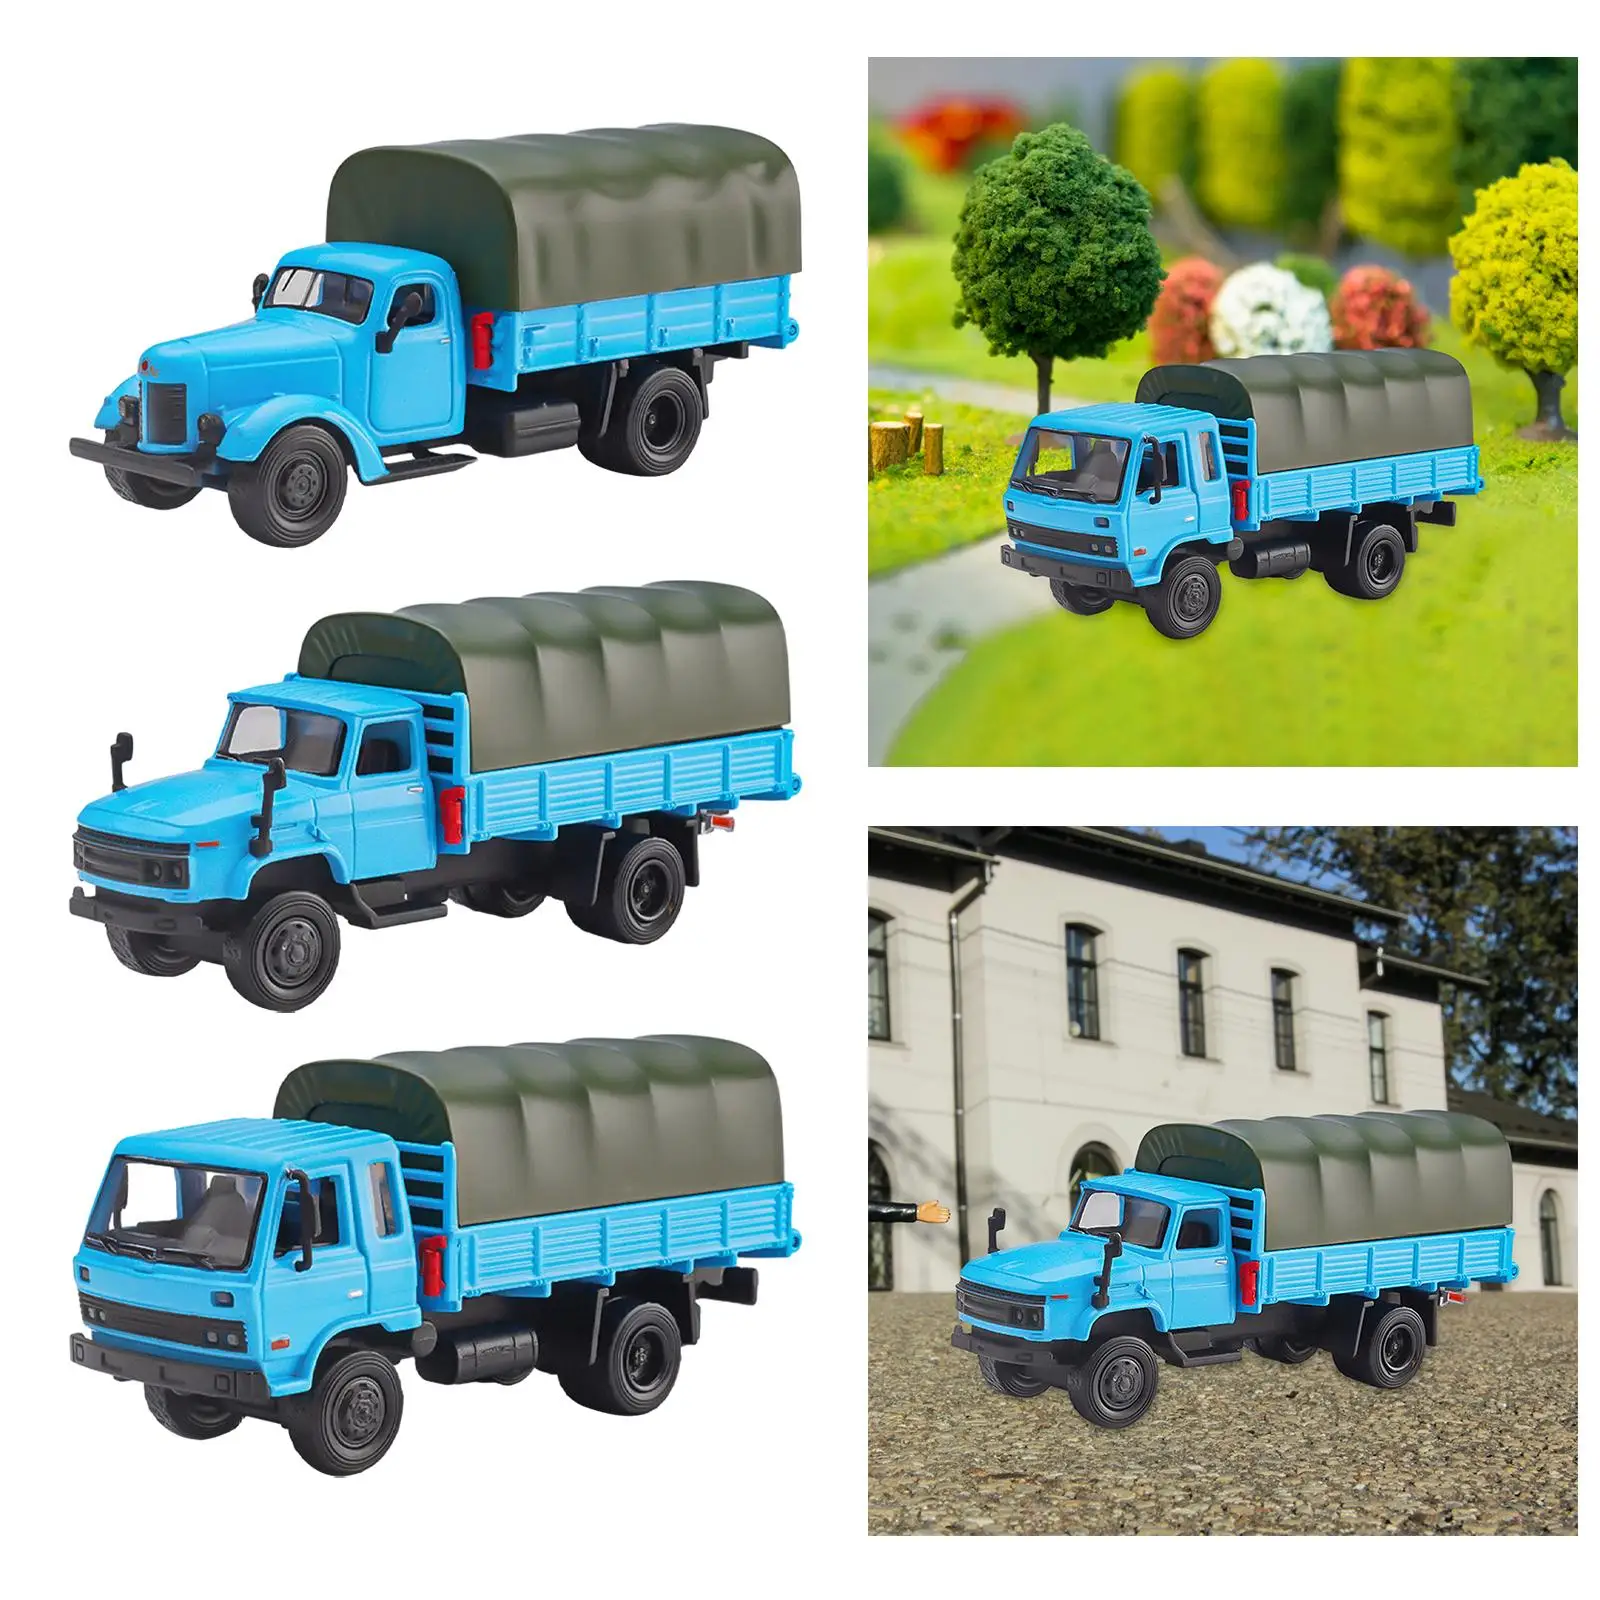 1:64 Transport Truck Dioramas Hand Painted Layout Movie Props Collections Alloy Truck Miniature Carrier Vehicle Decoration